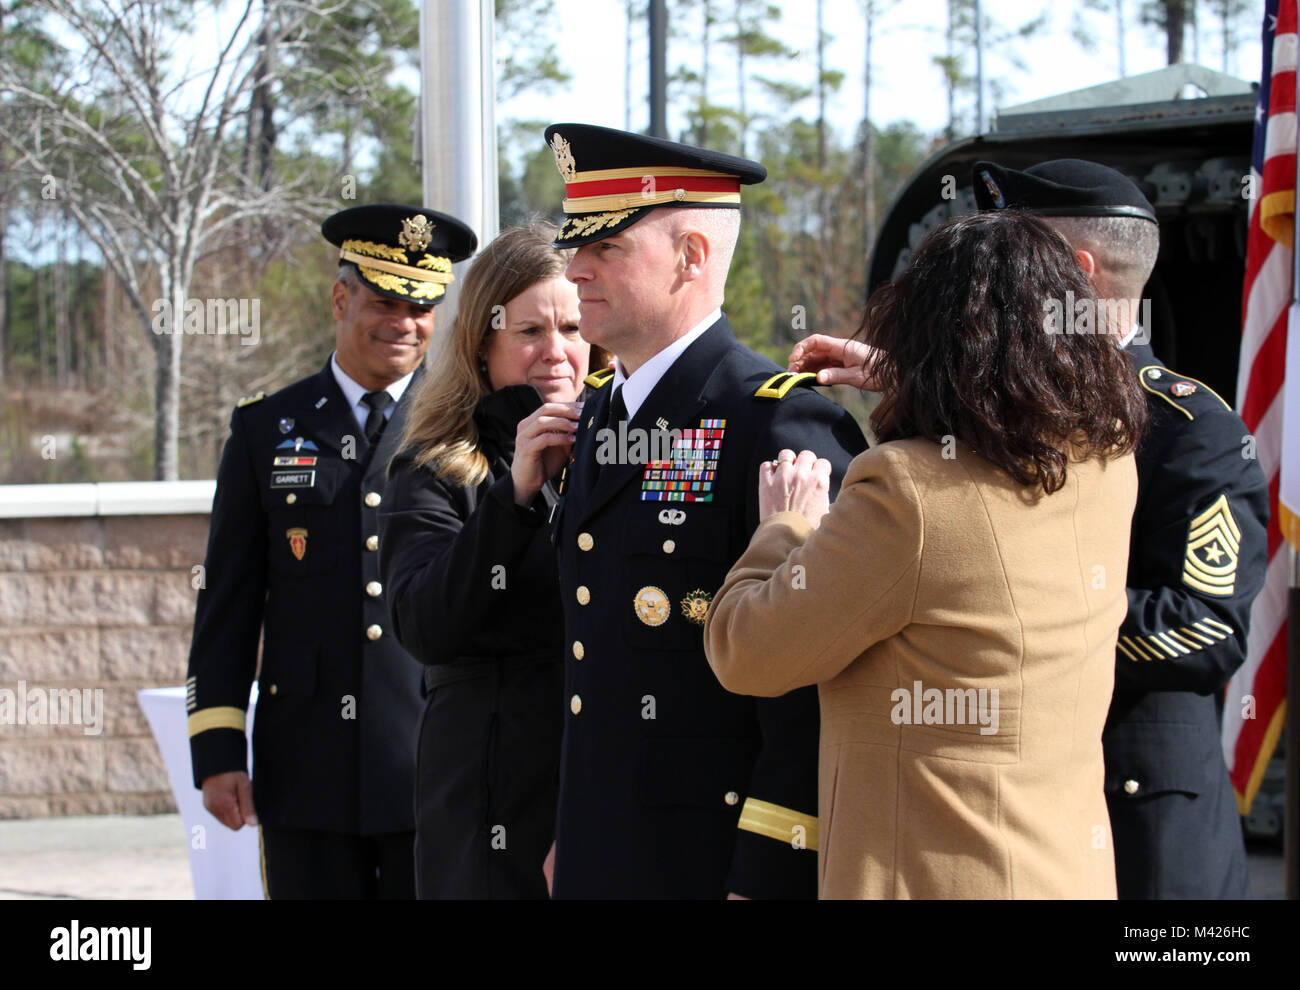 SHAW AIR FORCE BASE, S.C. (Feb. 2, 2018) - Lisa Obermire (left) and Cindy Morrissey (right) place brigadier general rank on the jacket of Brig. Gen. Michael T. Morrissey, the U.S. Army Central director of operations, during his promotion ceremony Feb. 2. Morrissey is part of the less than 1 percent of his commissioning year group to attain general officer rank. (U.S. Army photo by Staff Sgt. Christal M. Crawford/Released) Stock Photo